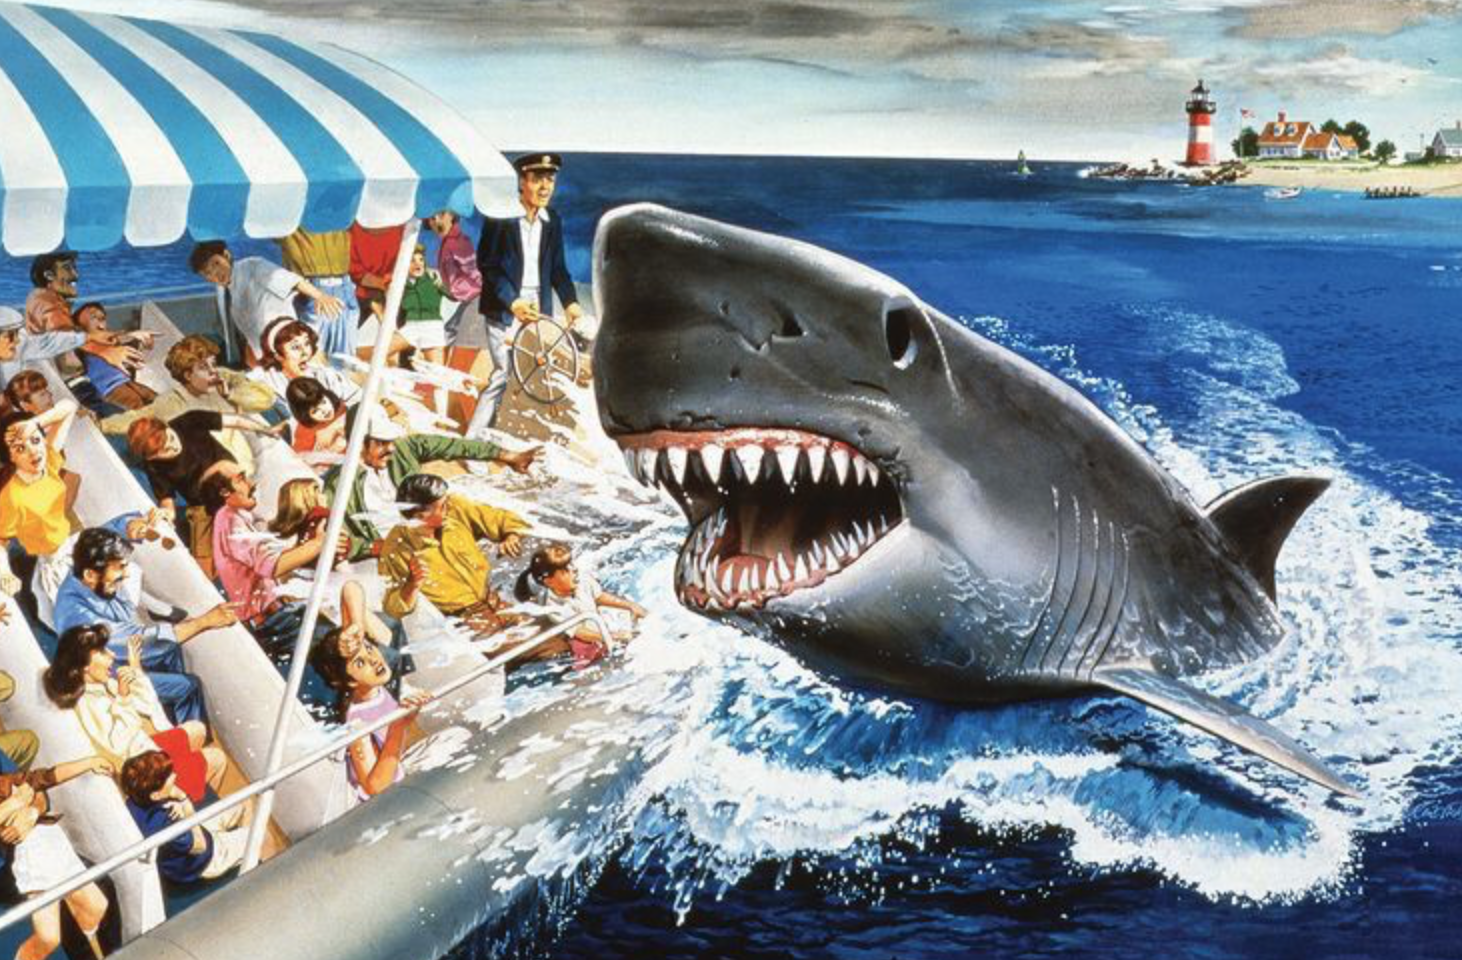 Jaws The Ride concept art